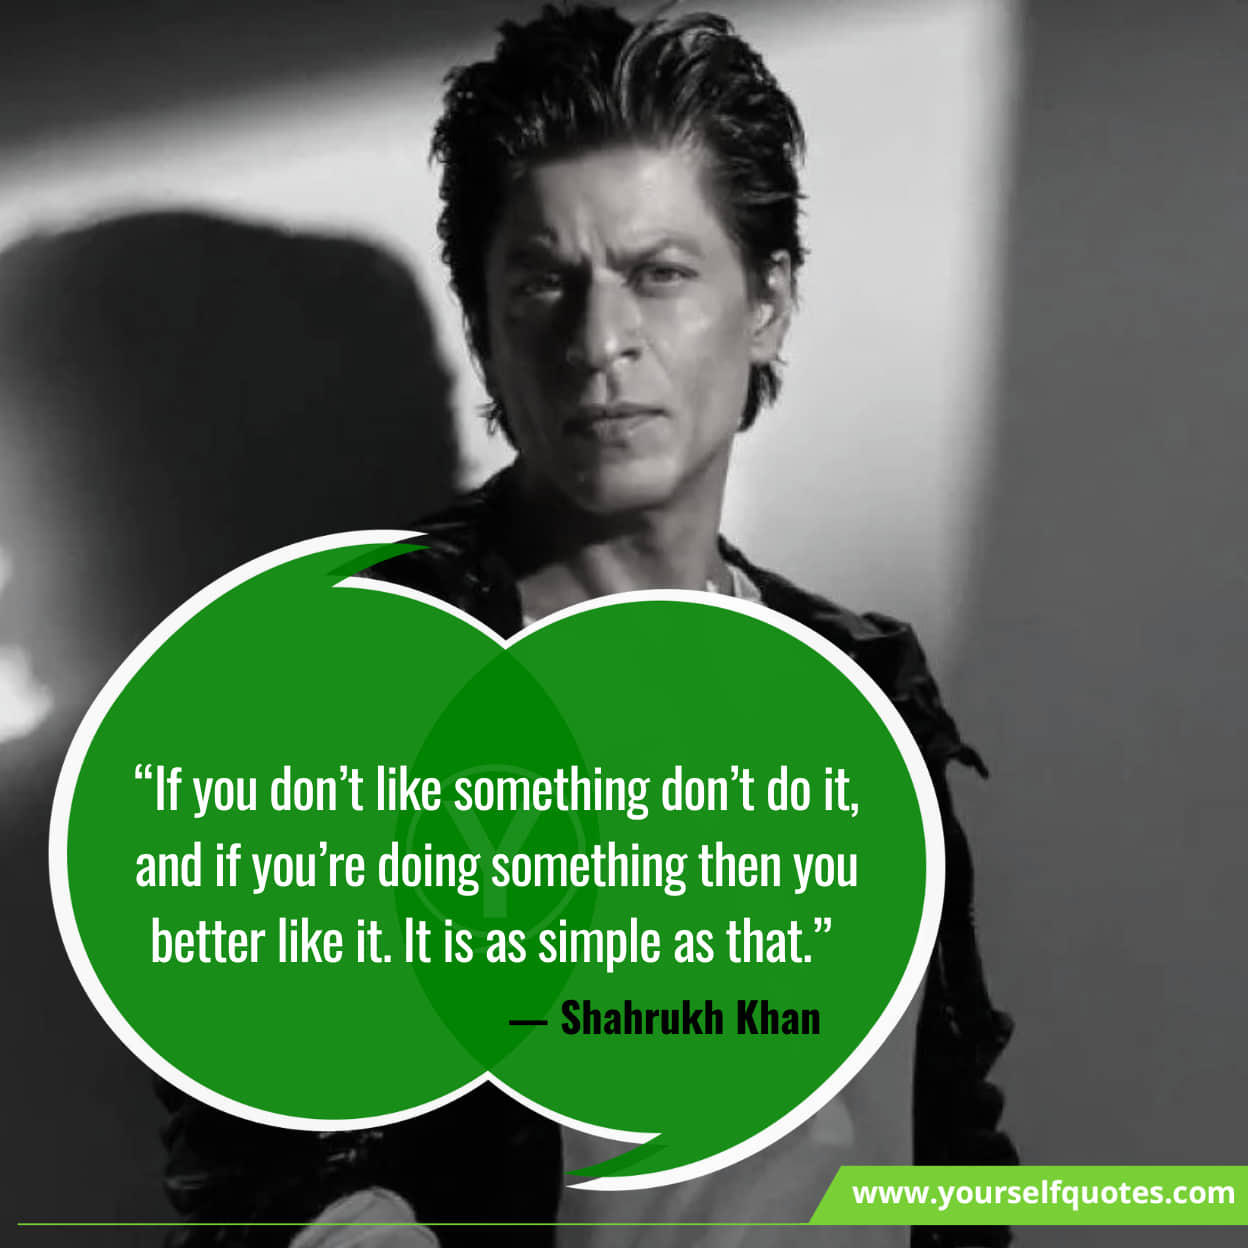 Shahrukh Khan quotes on acting and Bollywood